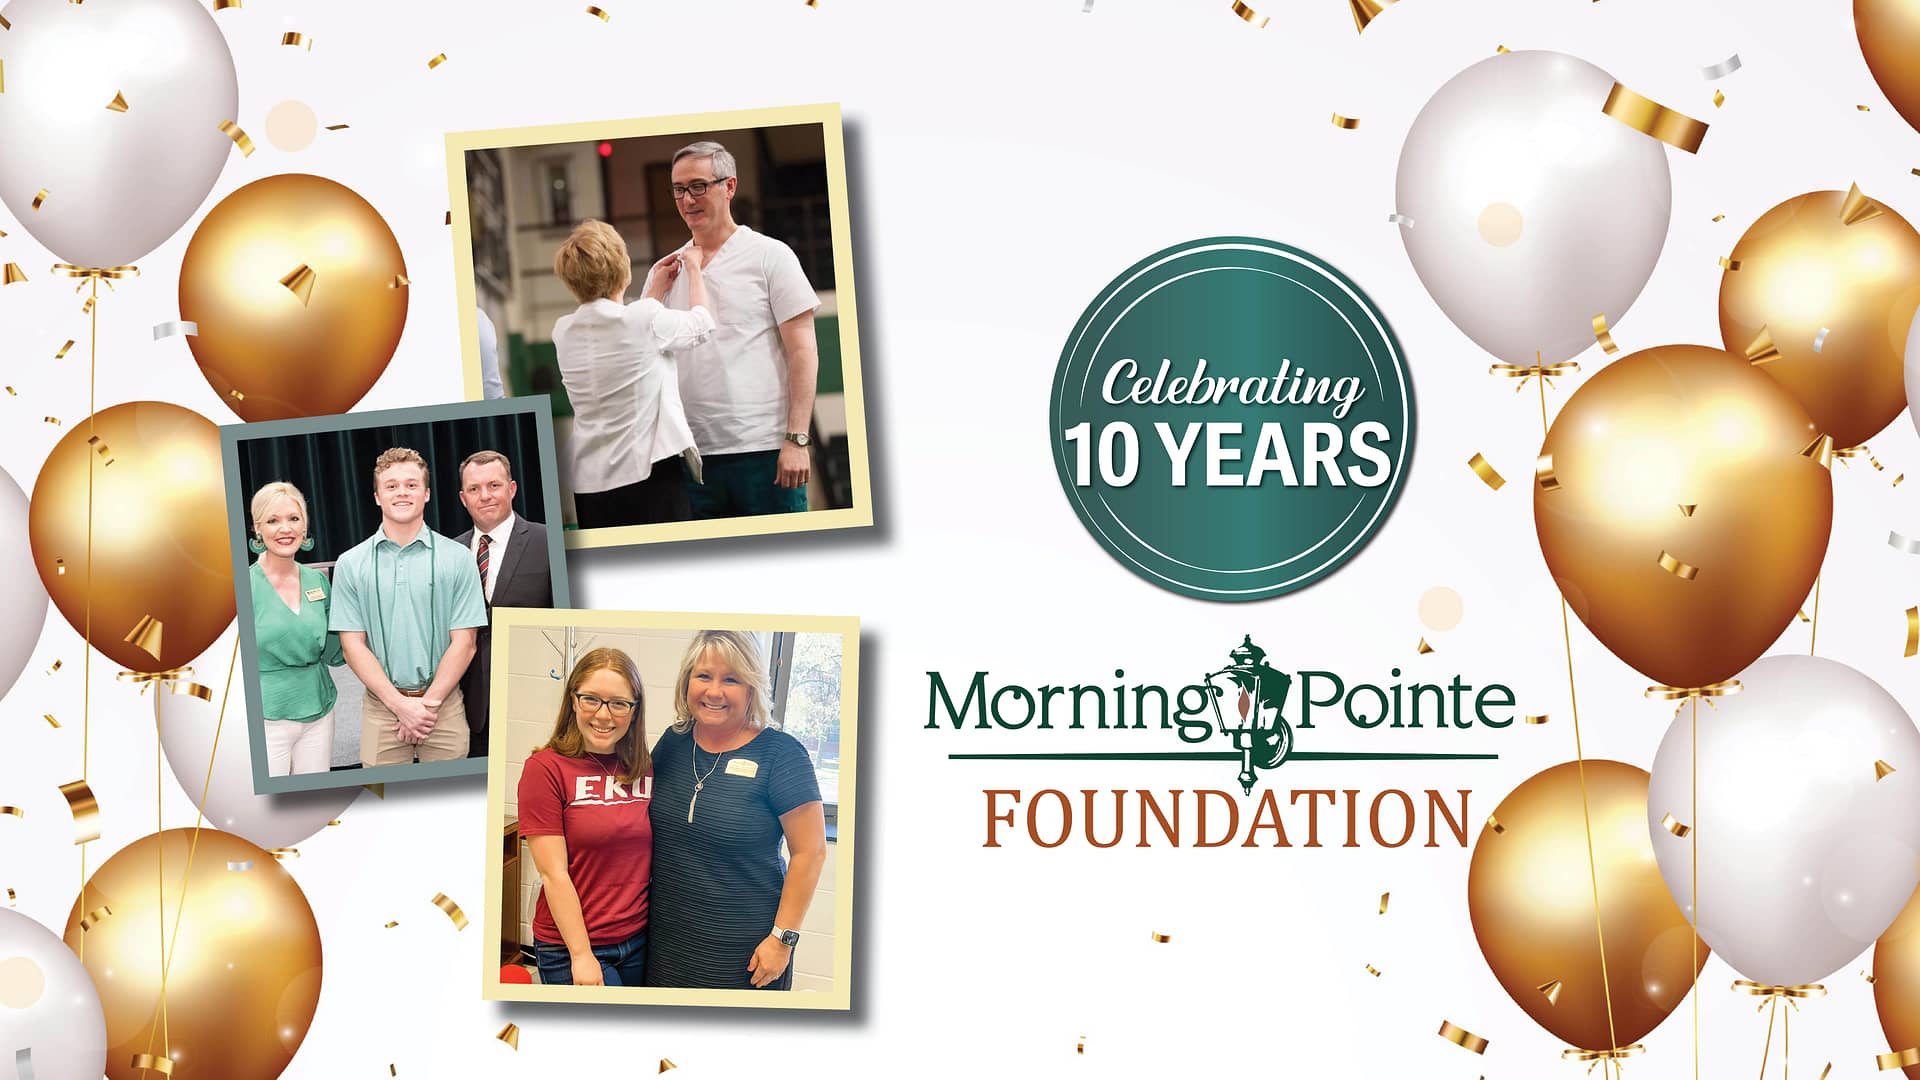 Morning Pointe Foundation 10-year anniversary image